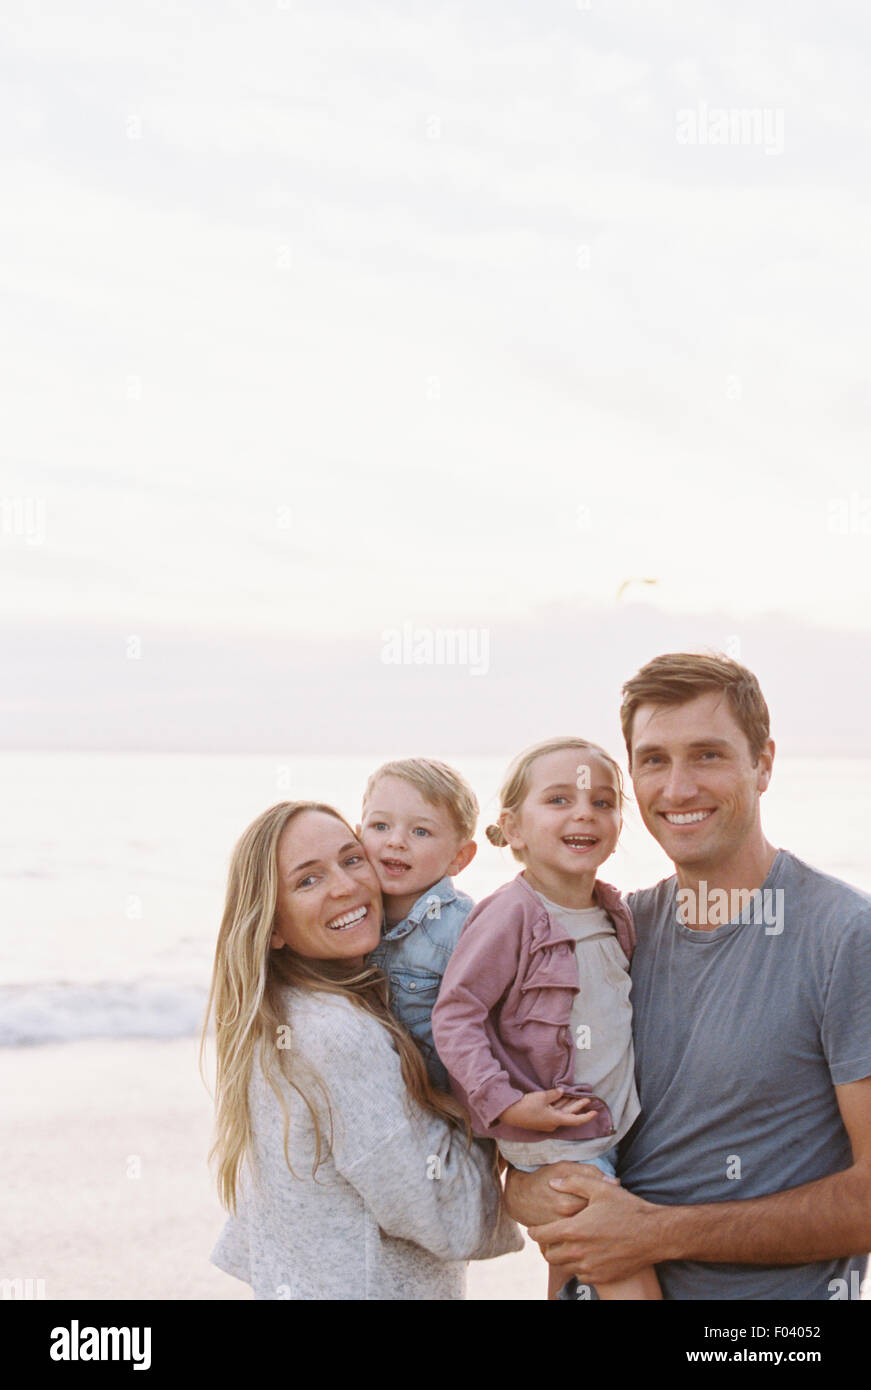 Couple standing with their son and daughter on a sandy beach by the ocean, looking at camera, smiling. Stock Photo